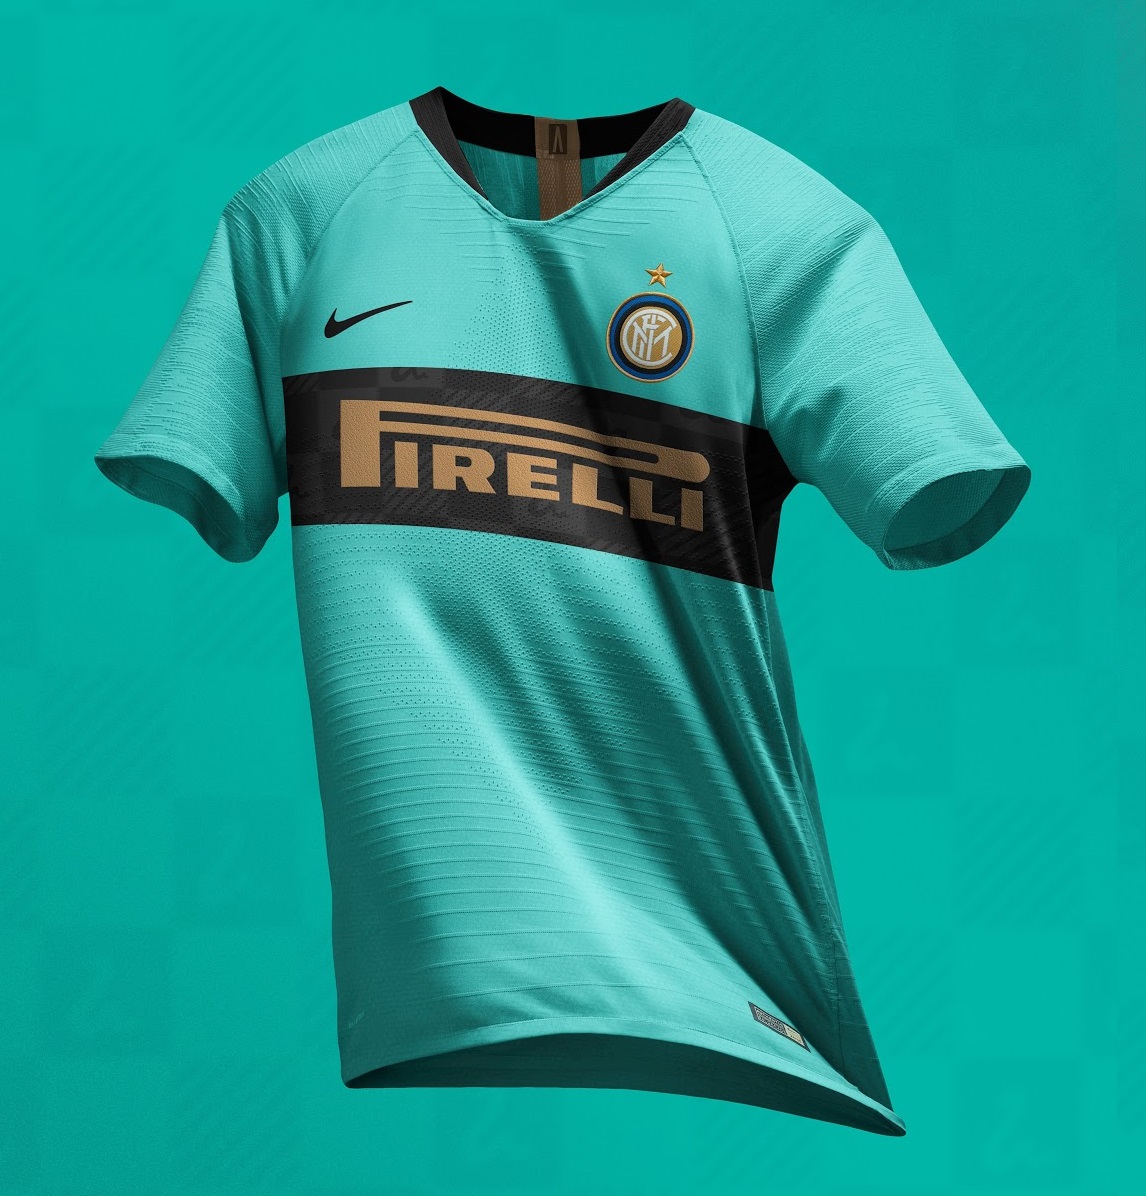 http://www.maillots-foot-actu.fr/wp-content/uploads/2018/12/Inter-Milan-2020-possible-maillot-ext%C3%A9rieur-foot.jpg